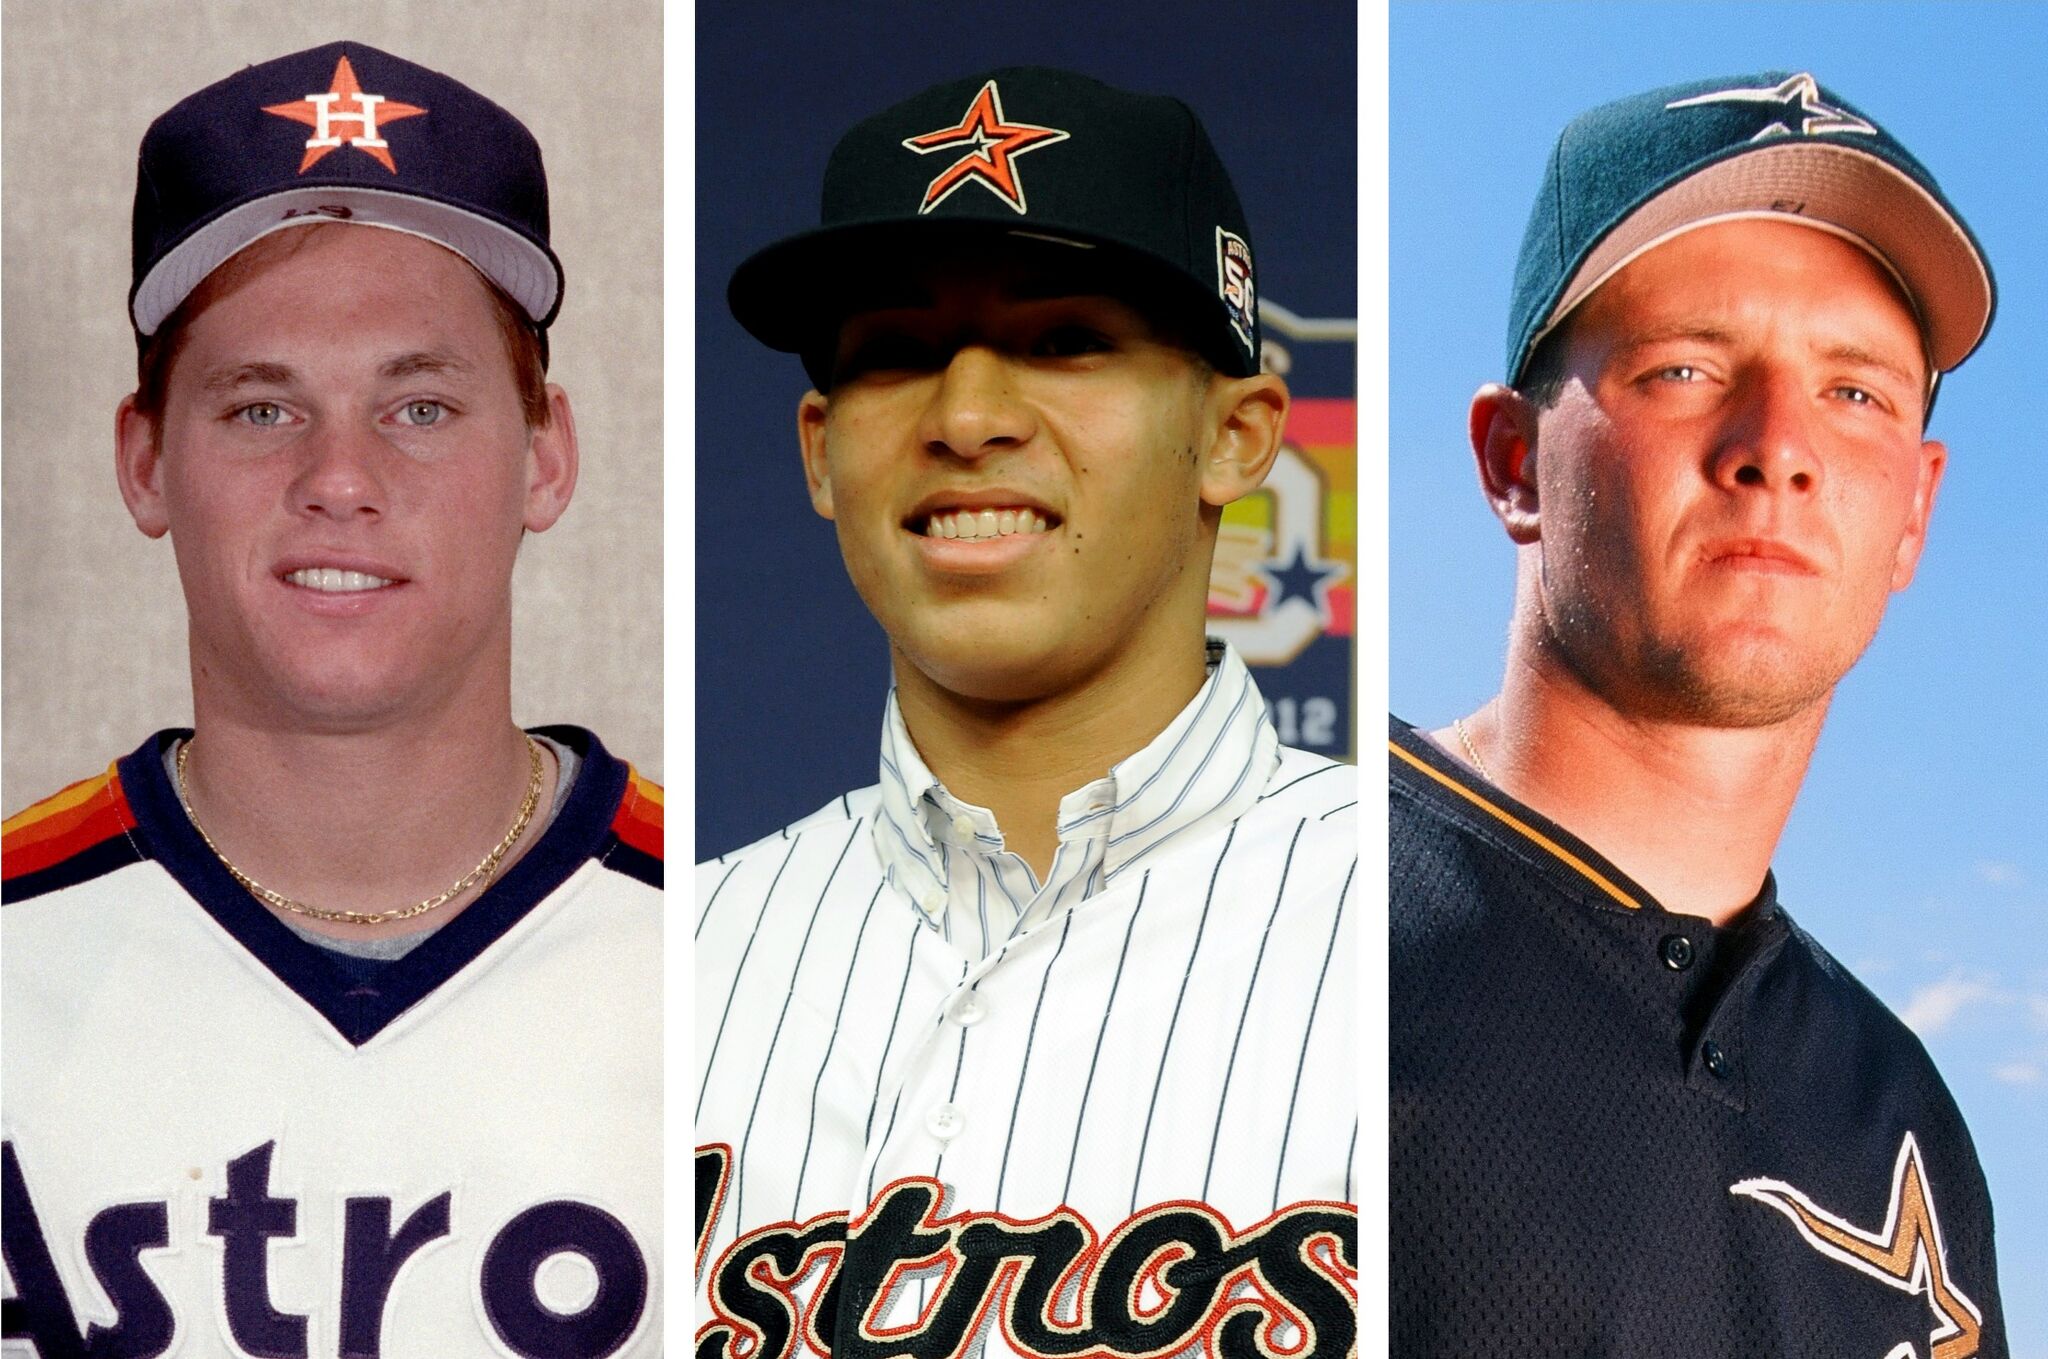 Astros' firstround draft picks 5 best, 5 worst in franchise history